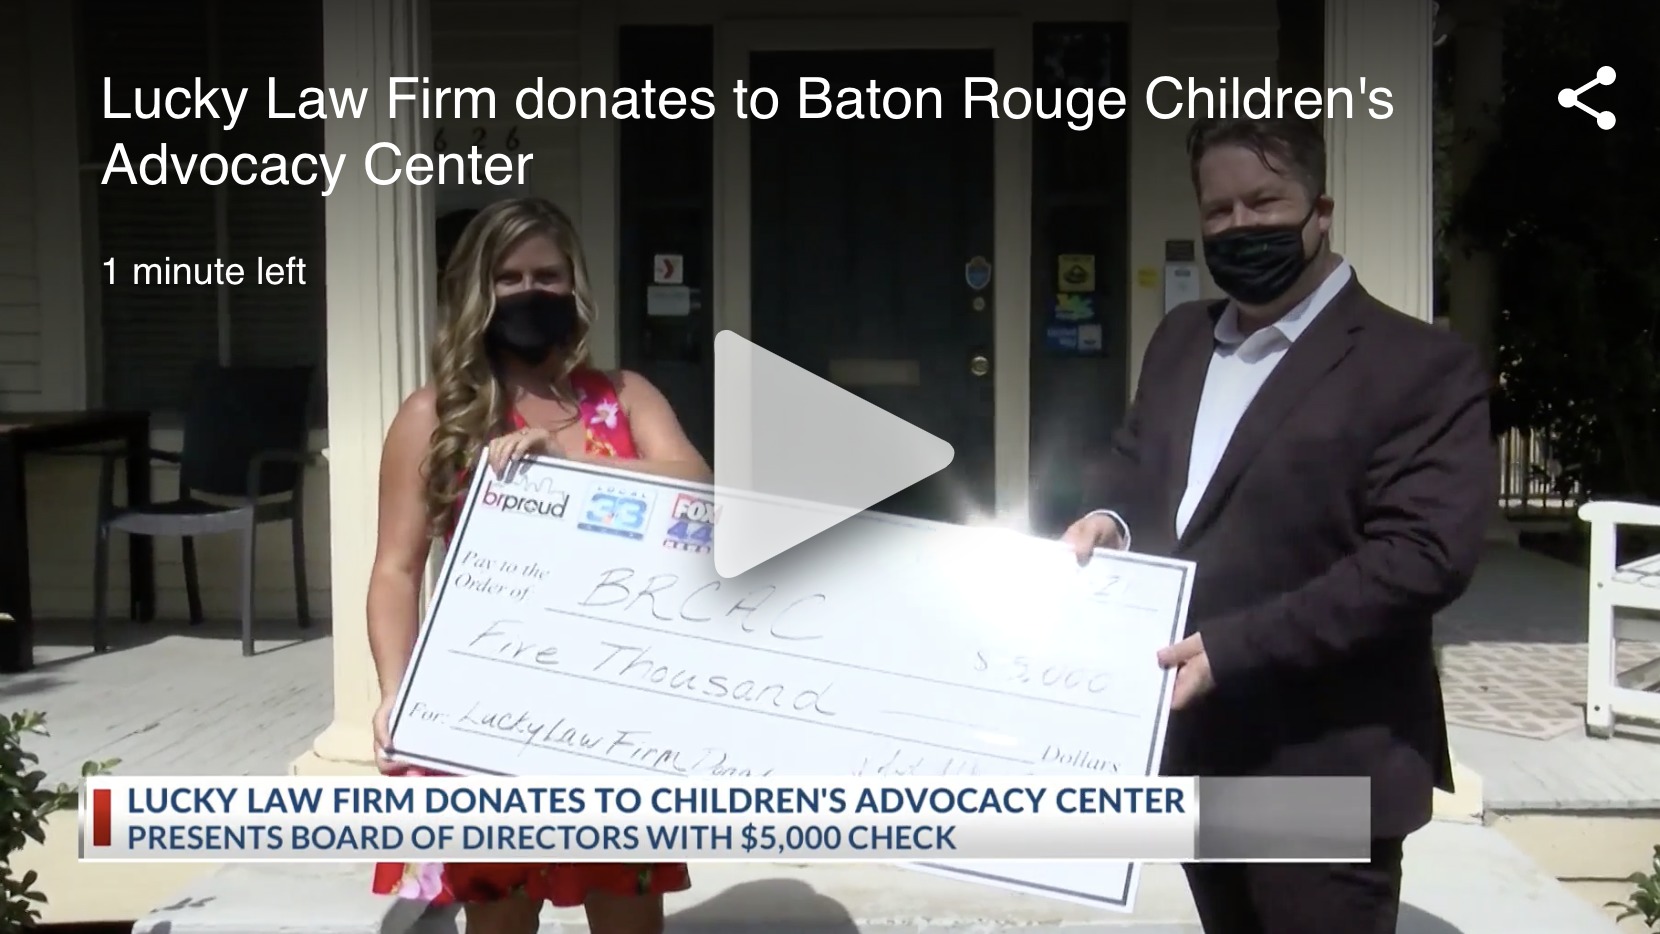 In The News: Lucky Law Firm Makes Donation To Baton Rouge Children’s Advocacy Center